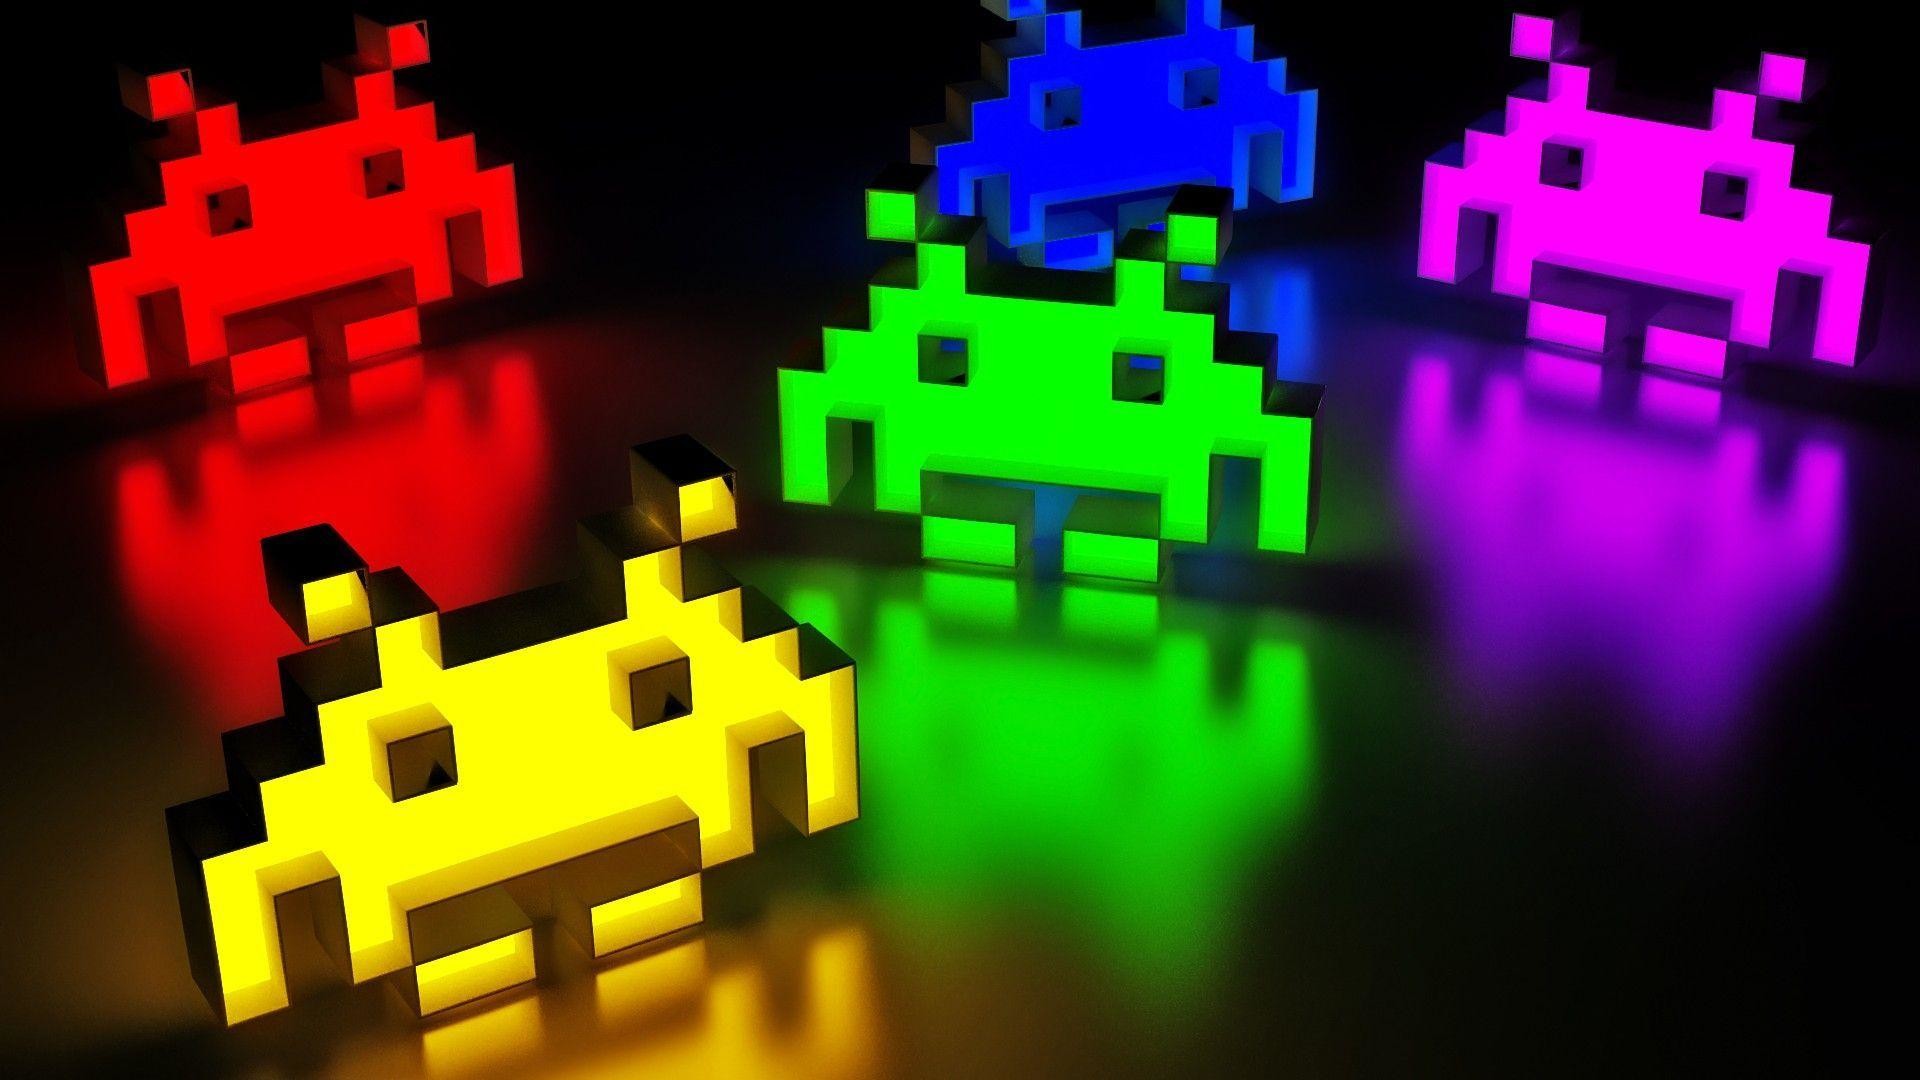 1920x1080 46 Space Invaders Wallpapers | Space Invaders Backgrounds Page 2